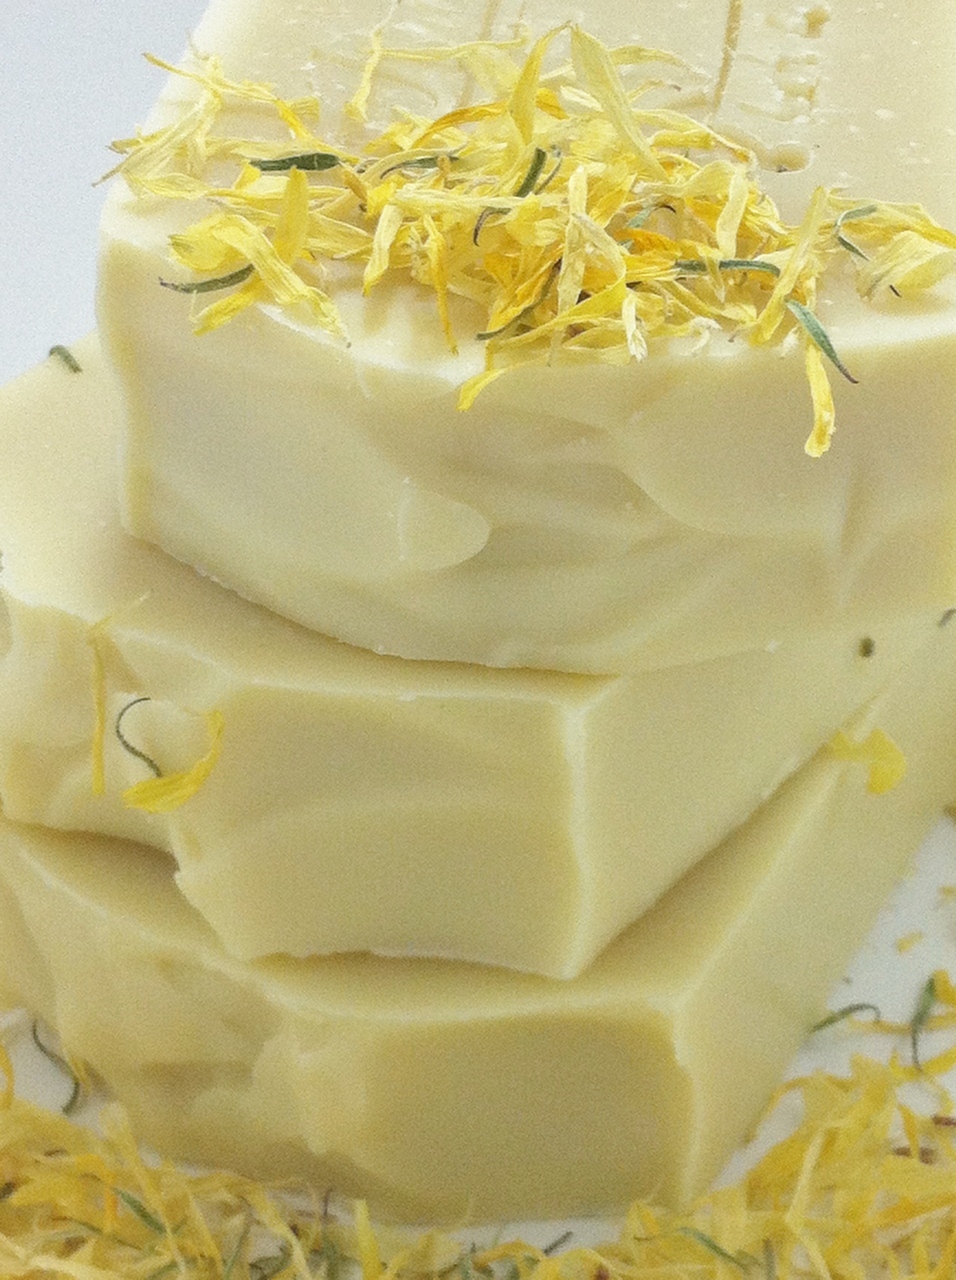 Flower Baby Calendula Soap Bar from Brosily Bath and Body's